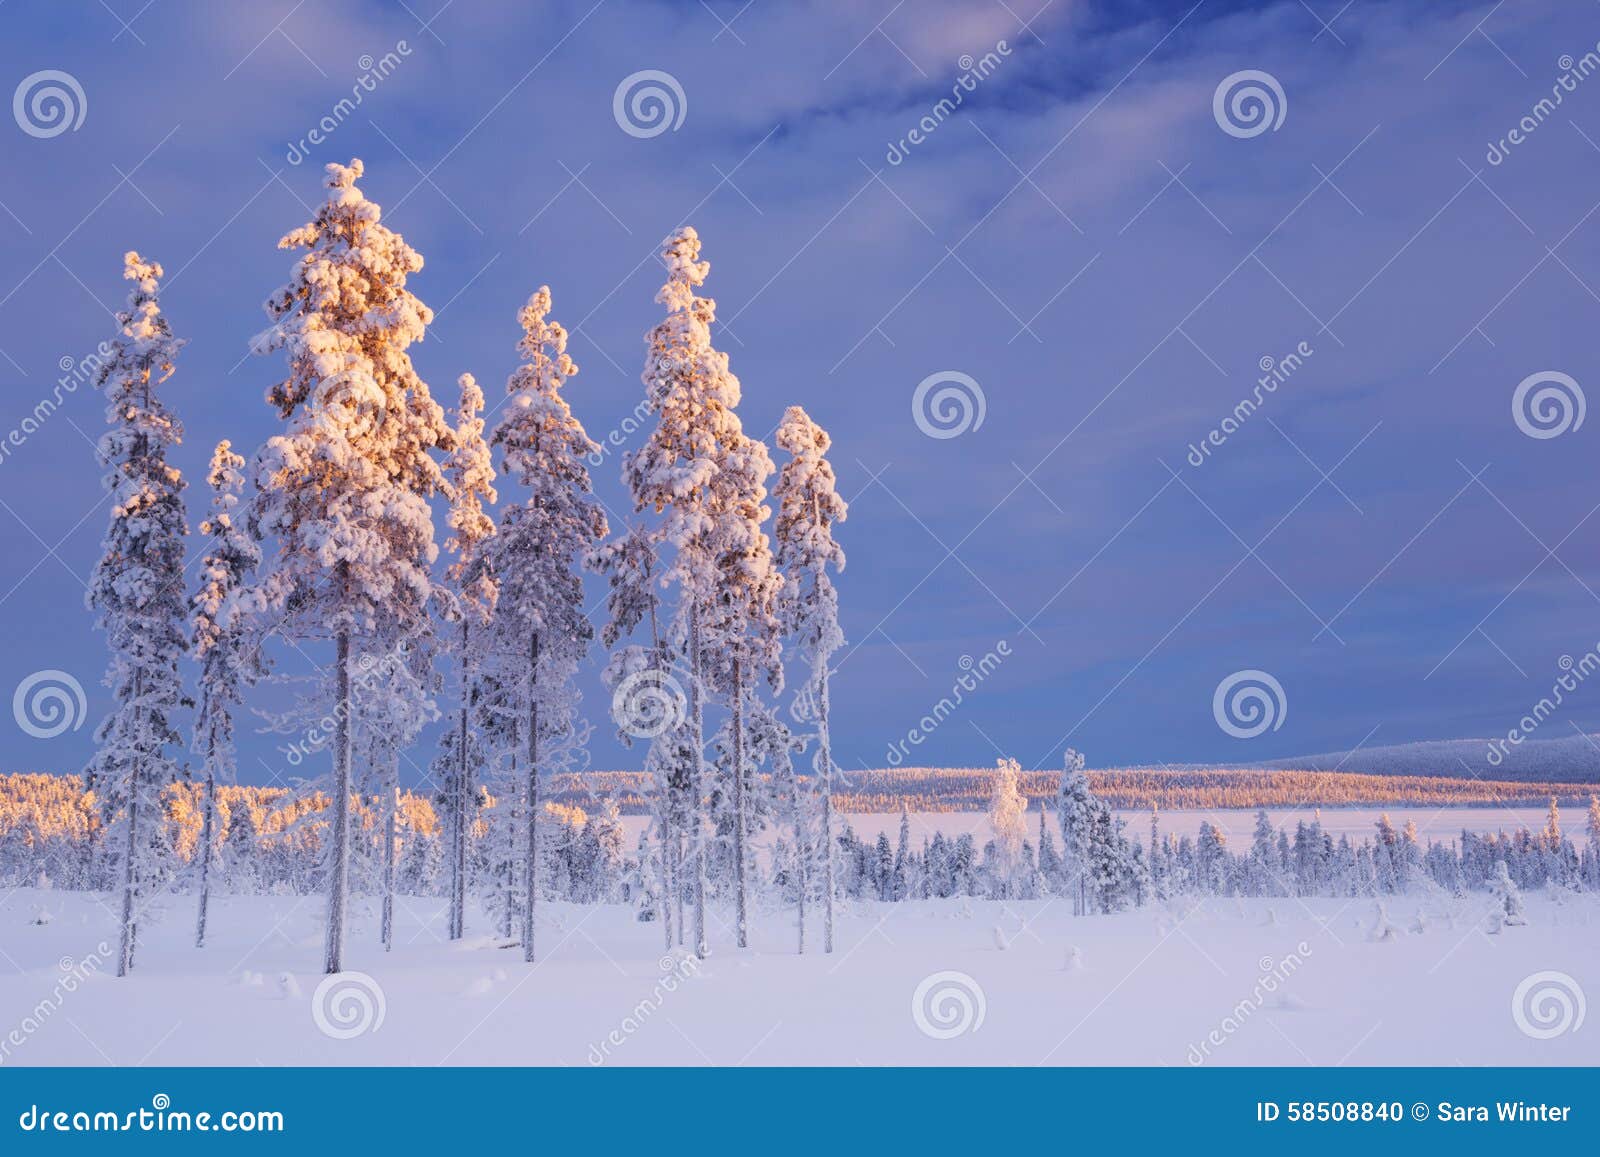 snowy landscape in finnish lapland in winter at sunset